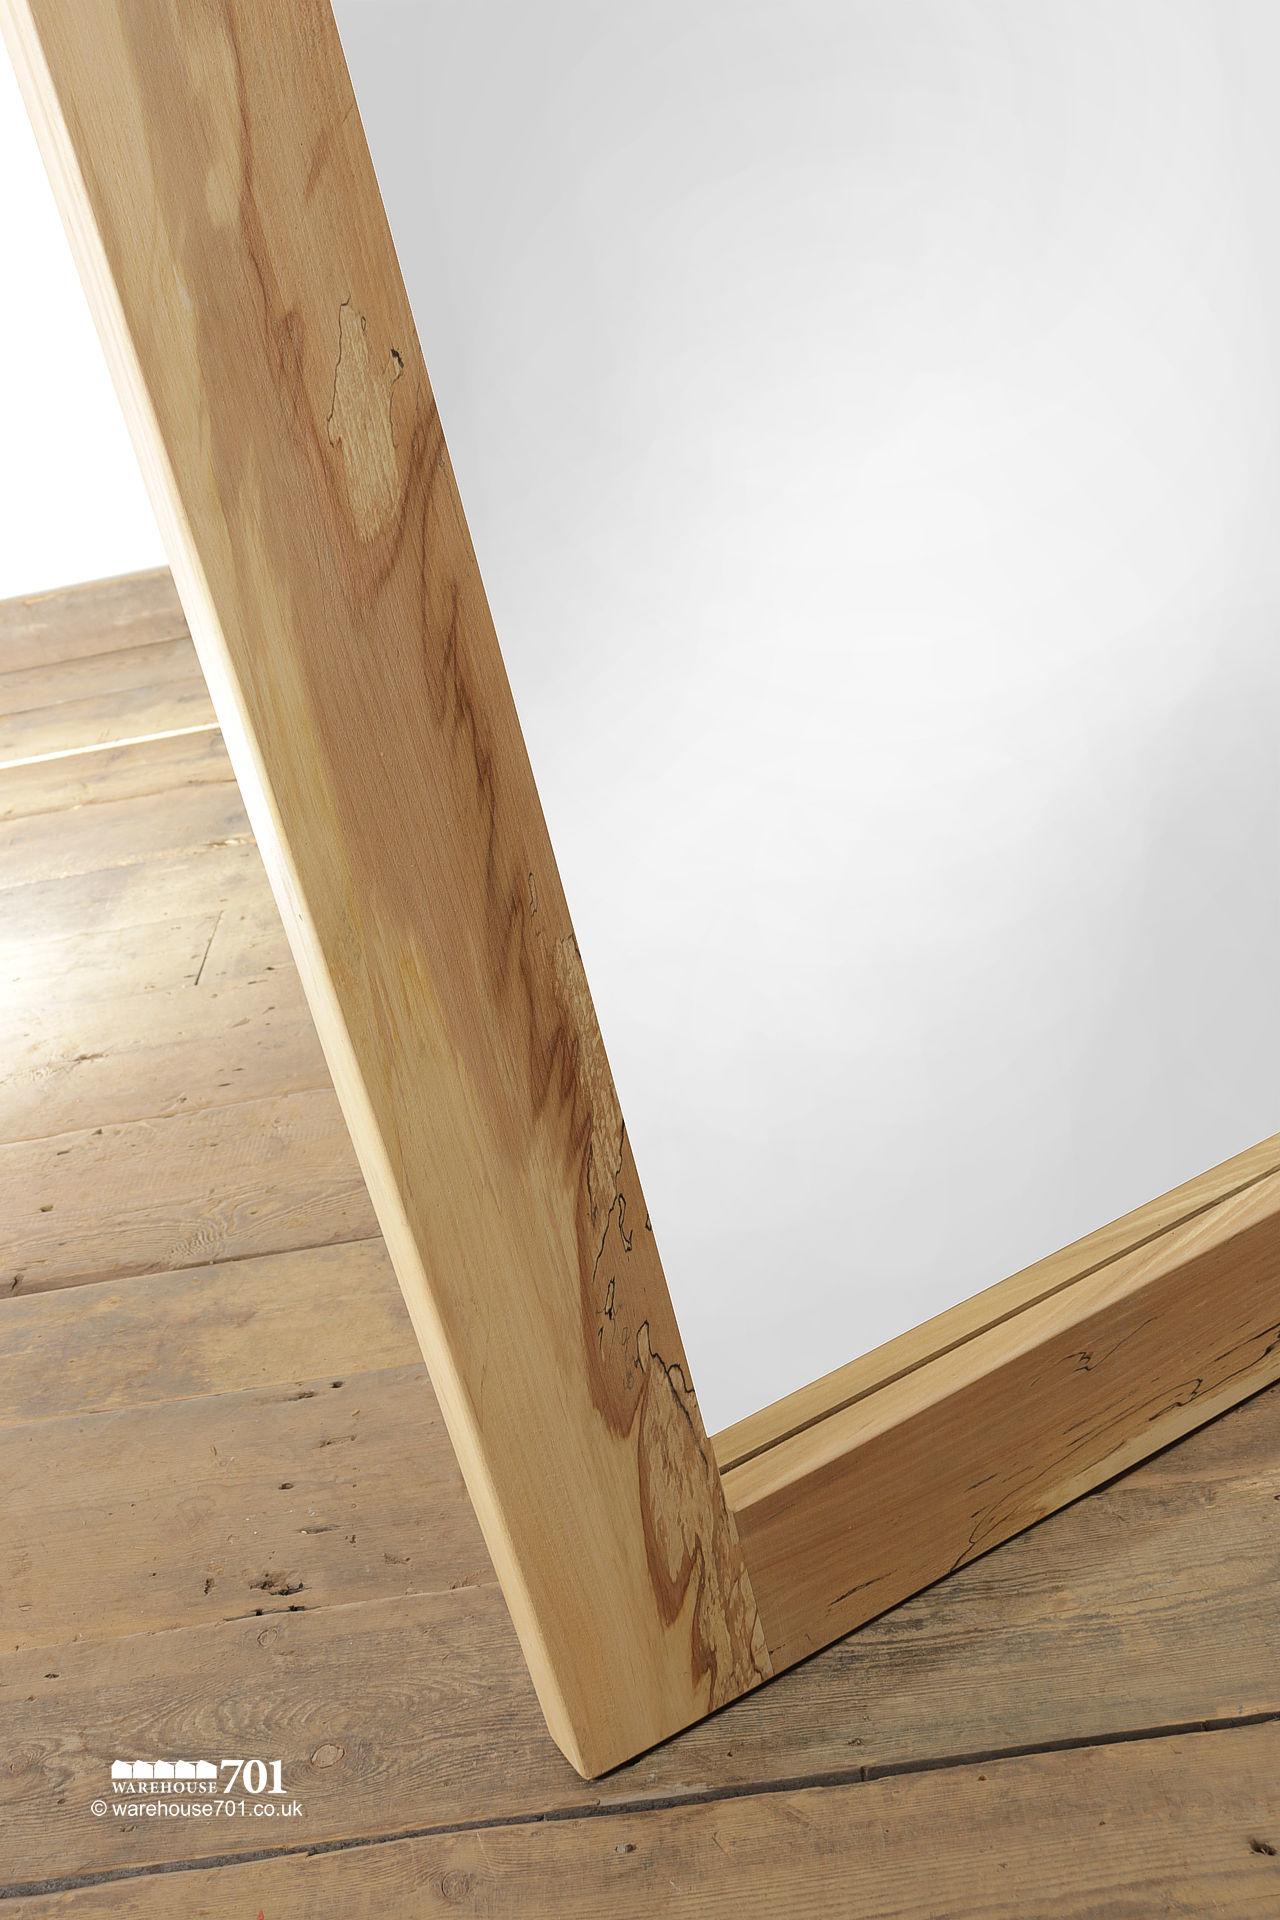 Large and Impressive Hand-Made Spalted Beech Wood Mirror #7